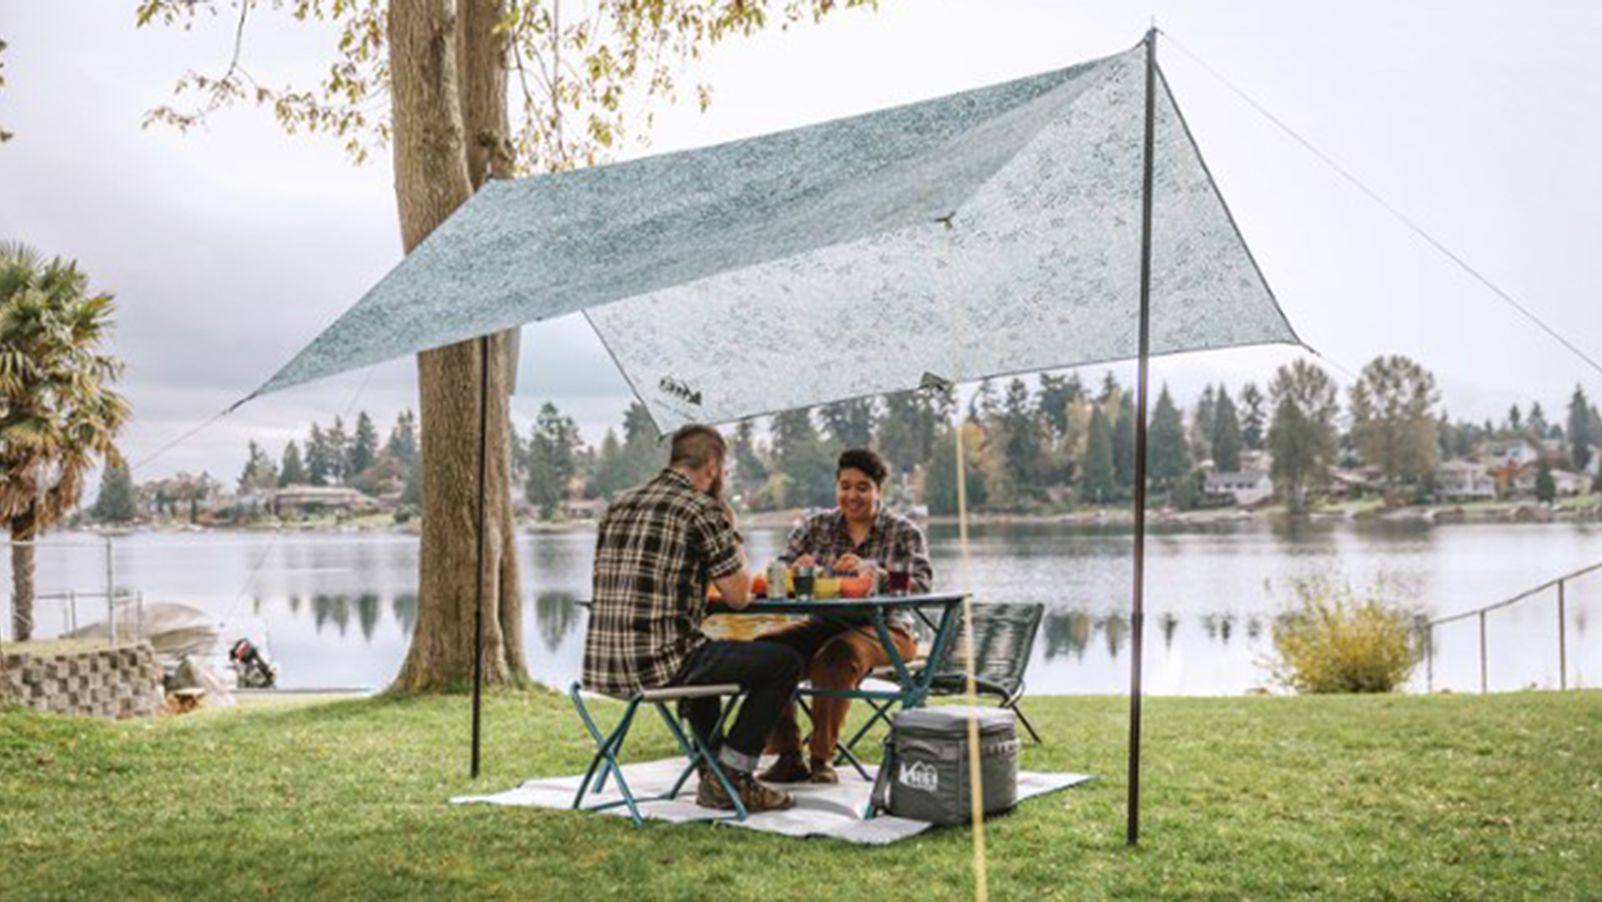 REI's bestselling products that are perfect for summer